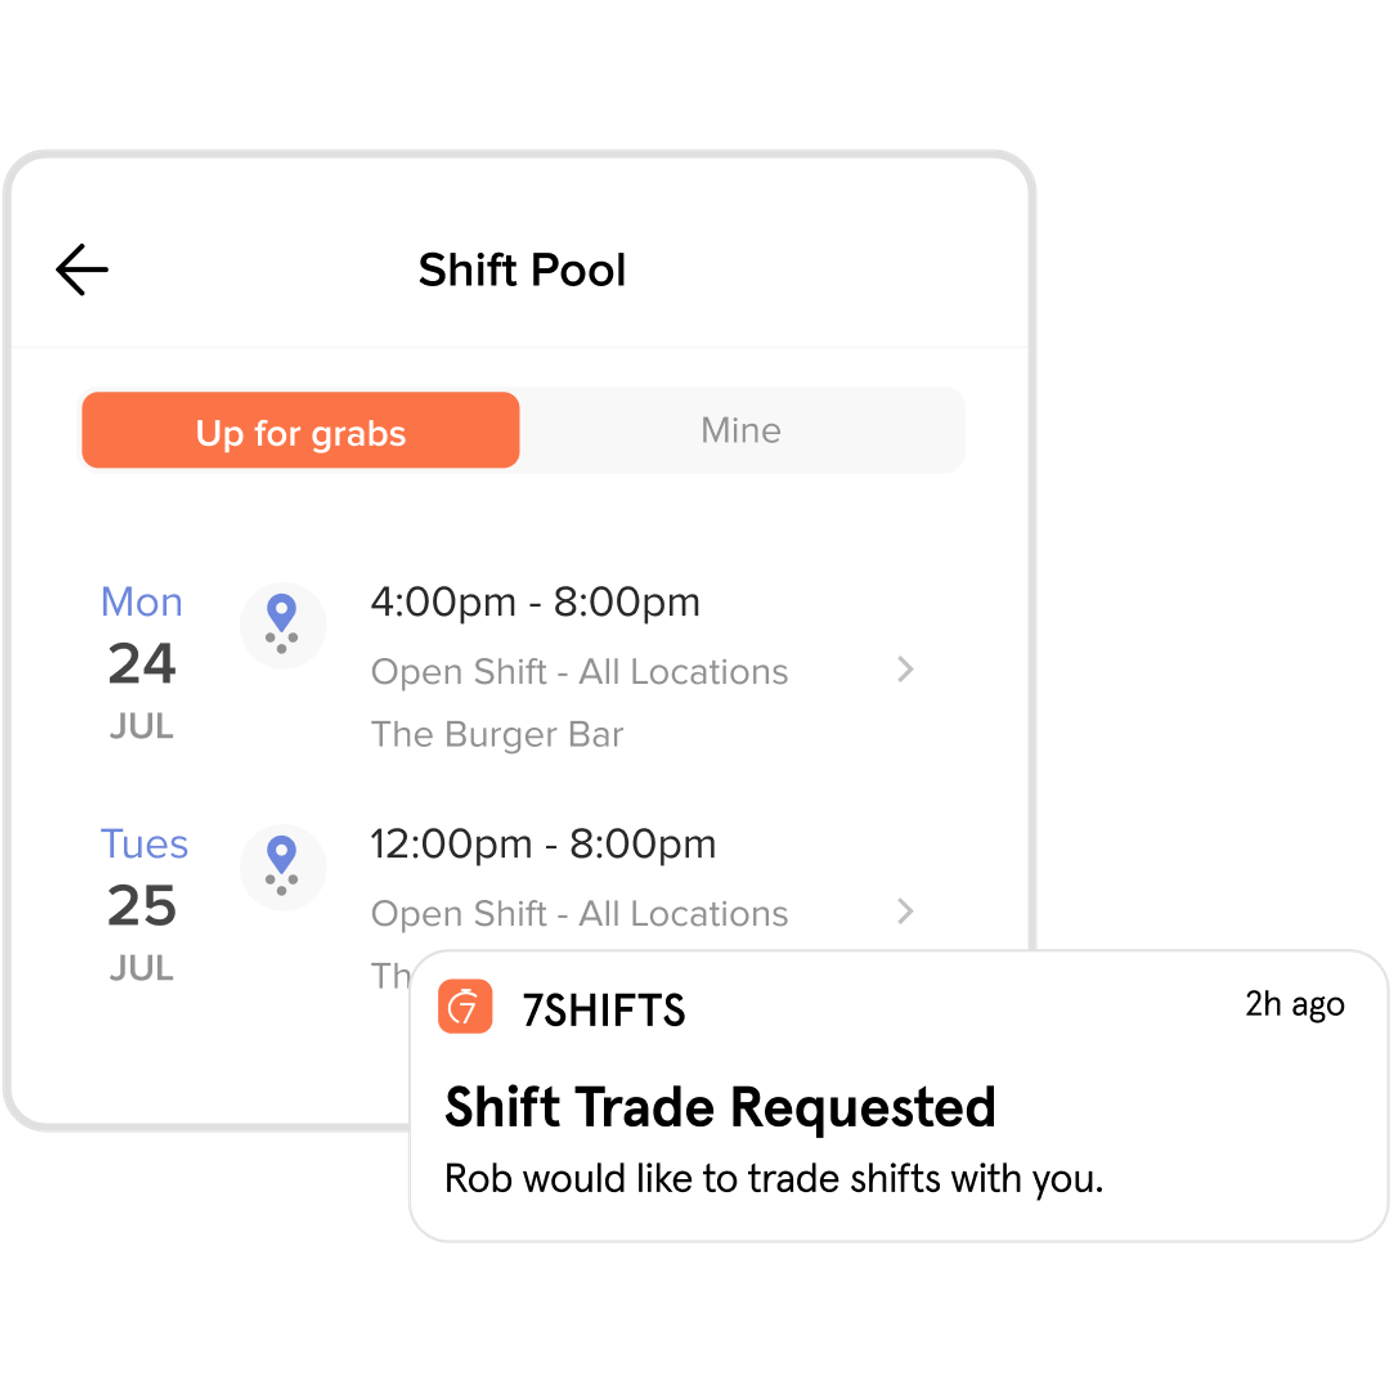 Shift pooling and shift trade request on mobile apps.